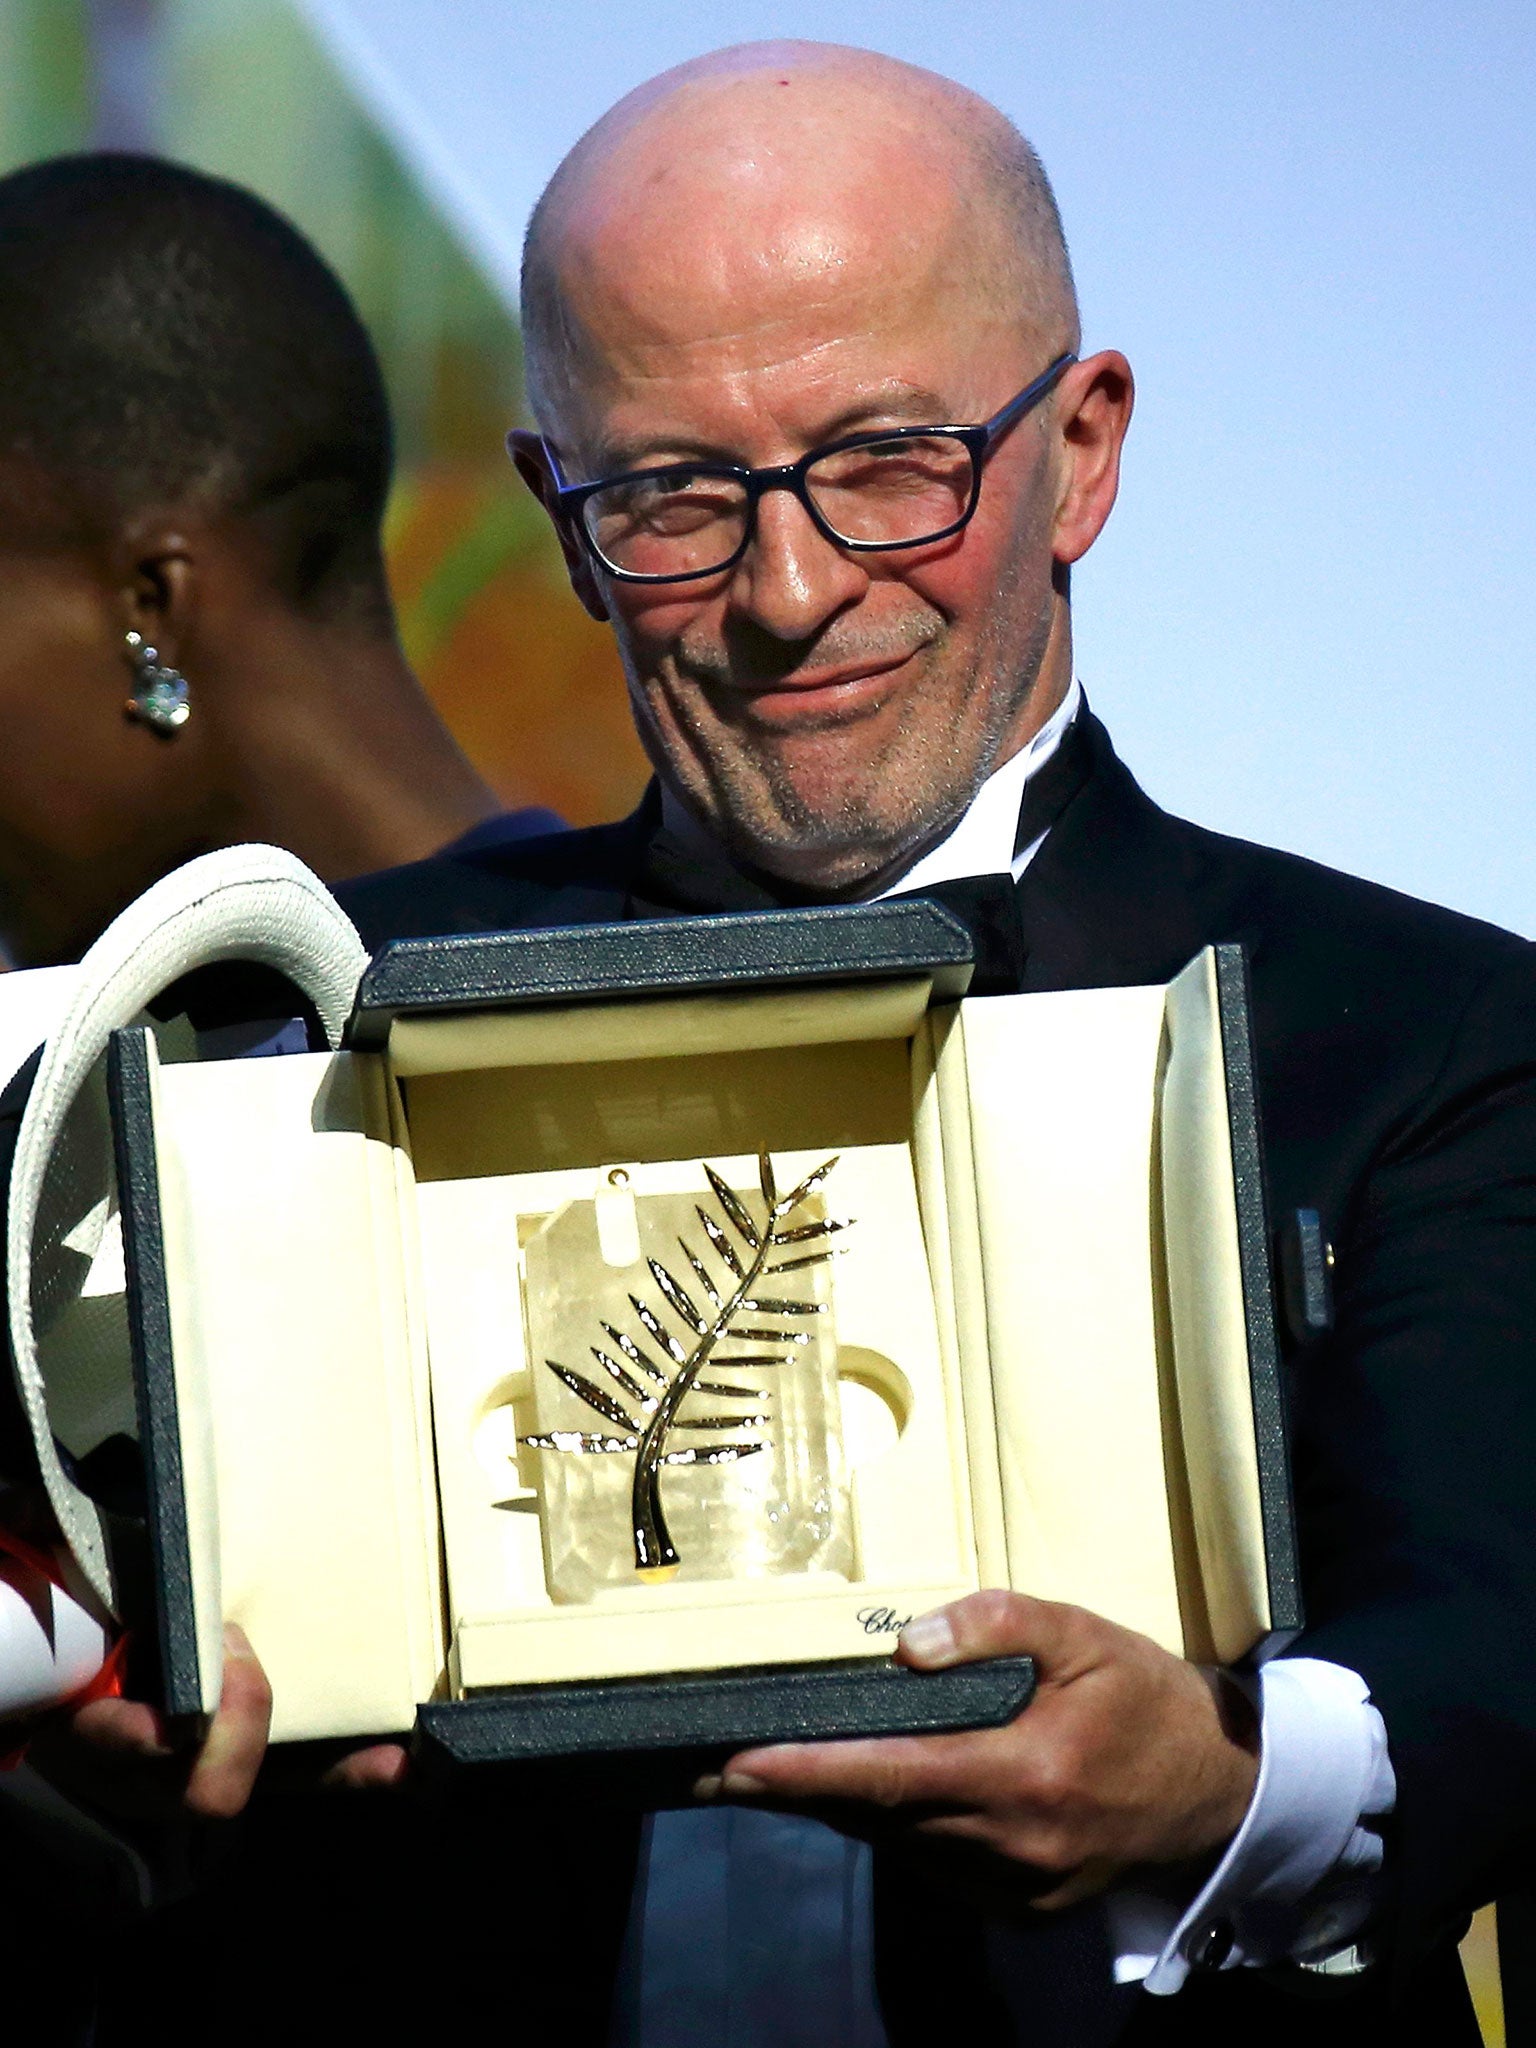 Director Jacques Audiard, Palme d'Or award winner for his film 'Dheepan', poses on stage during the closing ceremony of the 68th Cannes Film Festival